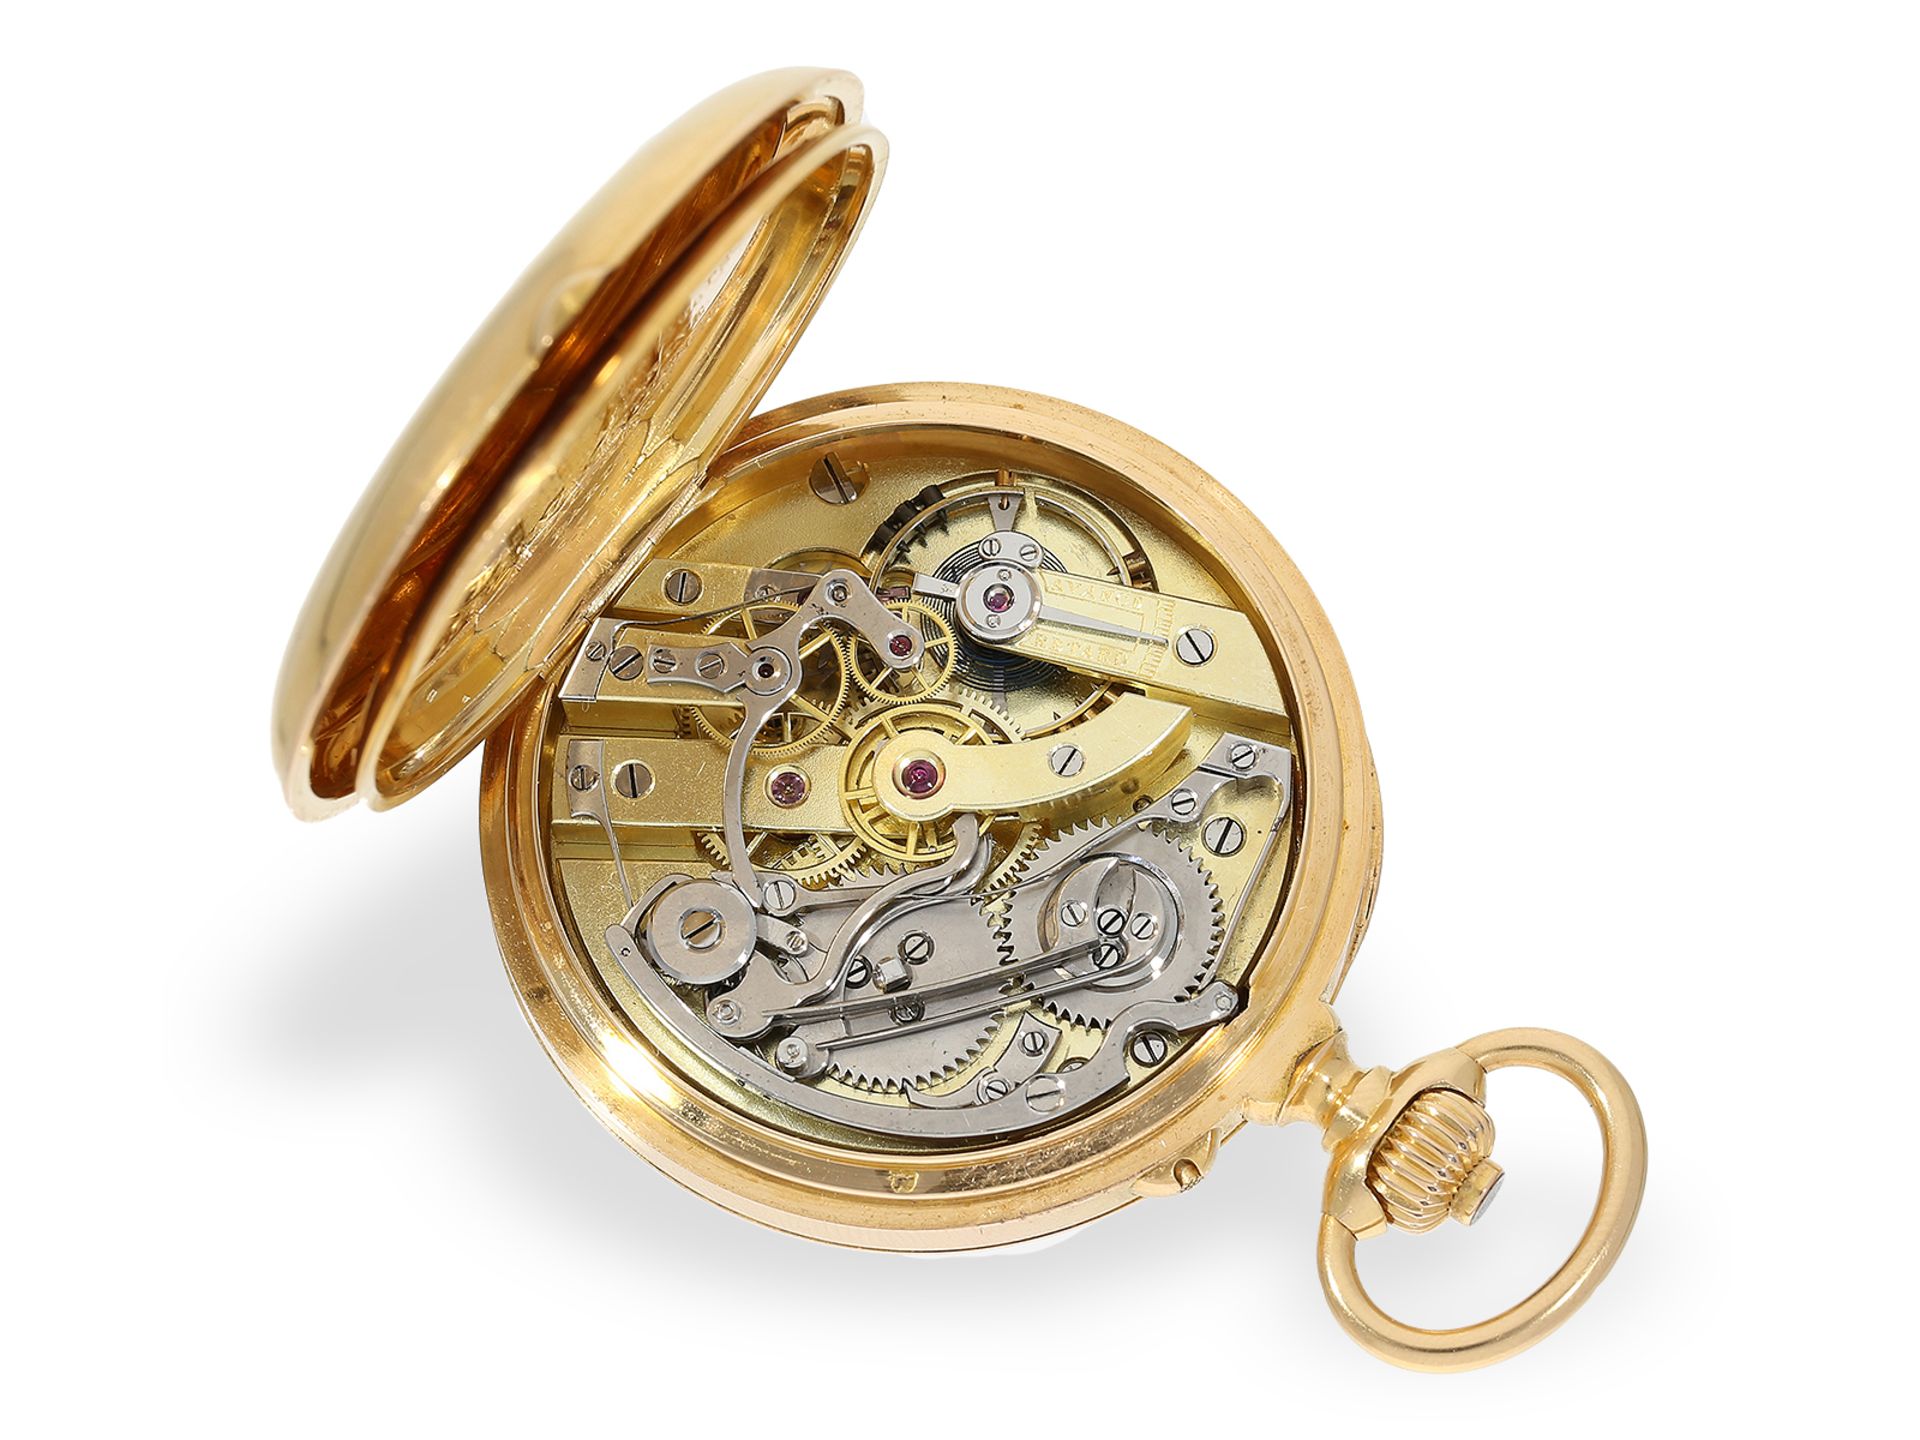 Pocket watch: important Le Roy chronometer with chronograph and central counter, No.57137-3601, ca. - Image 2 of 6